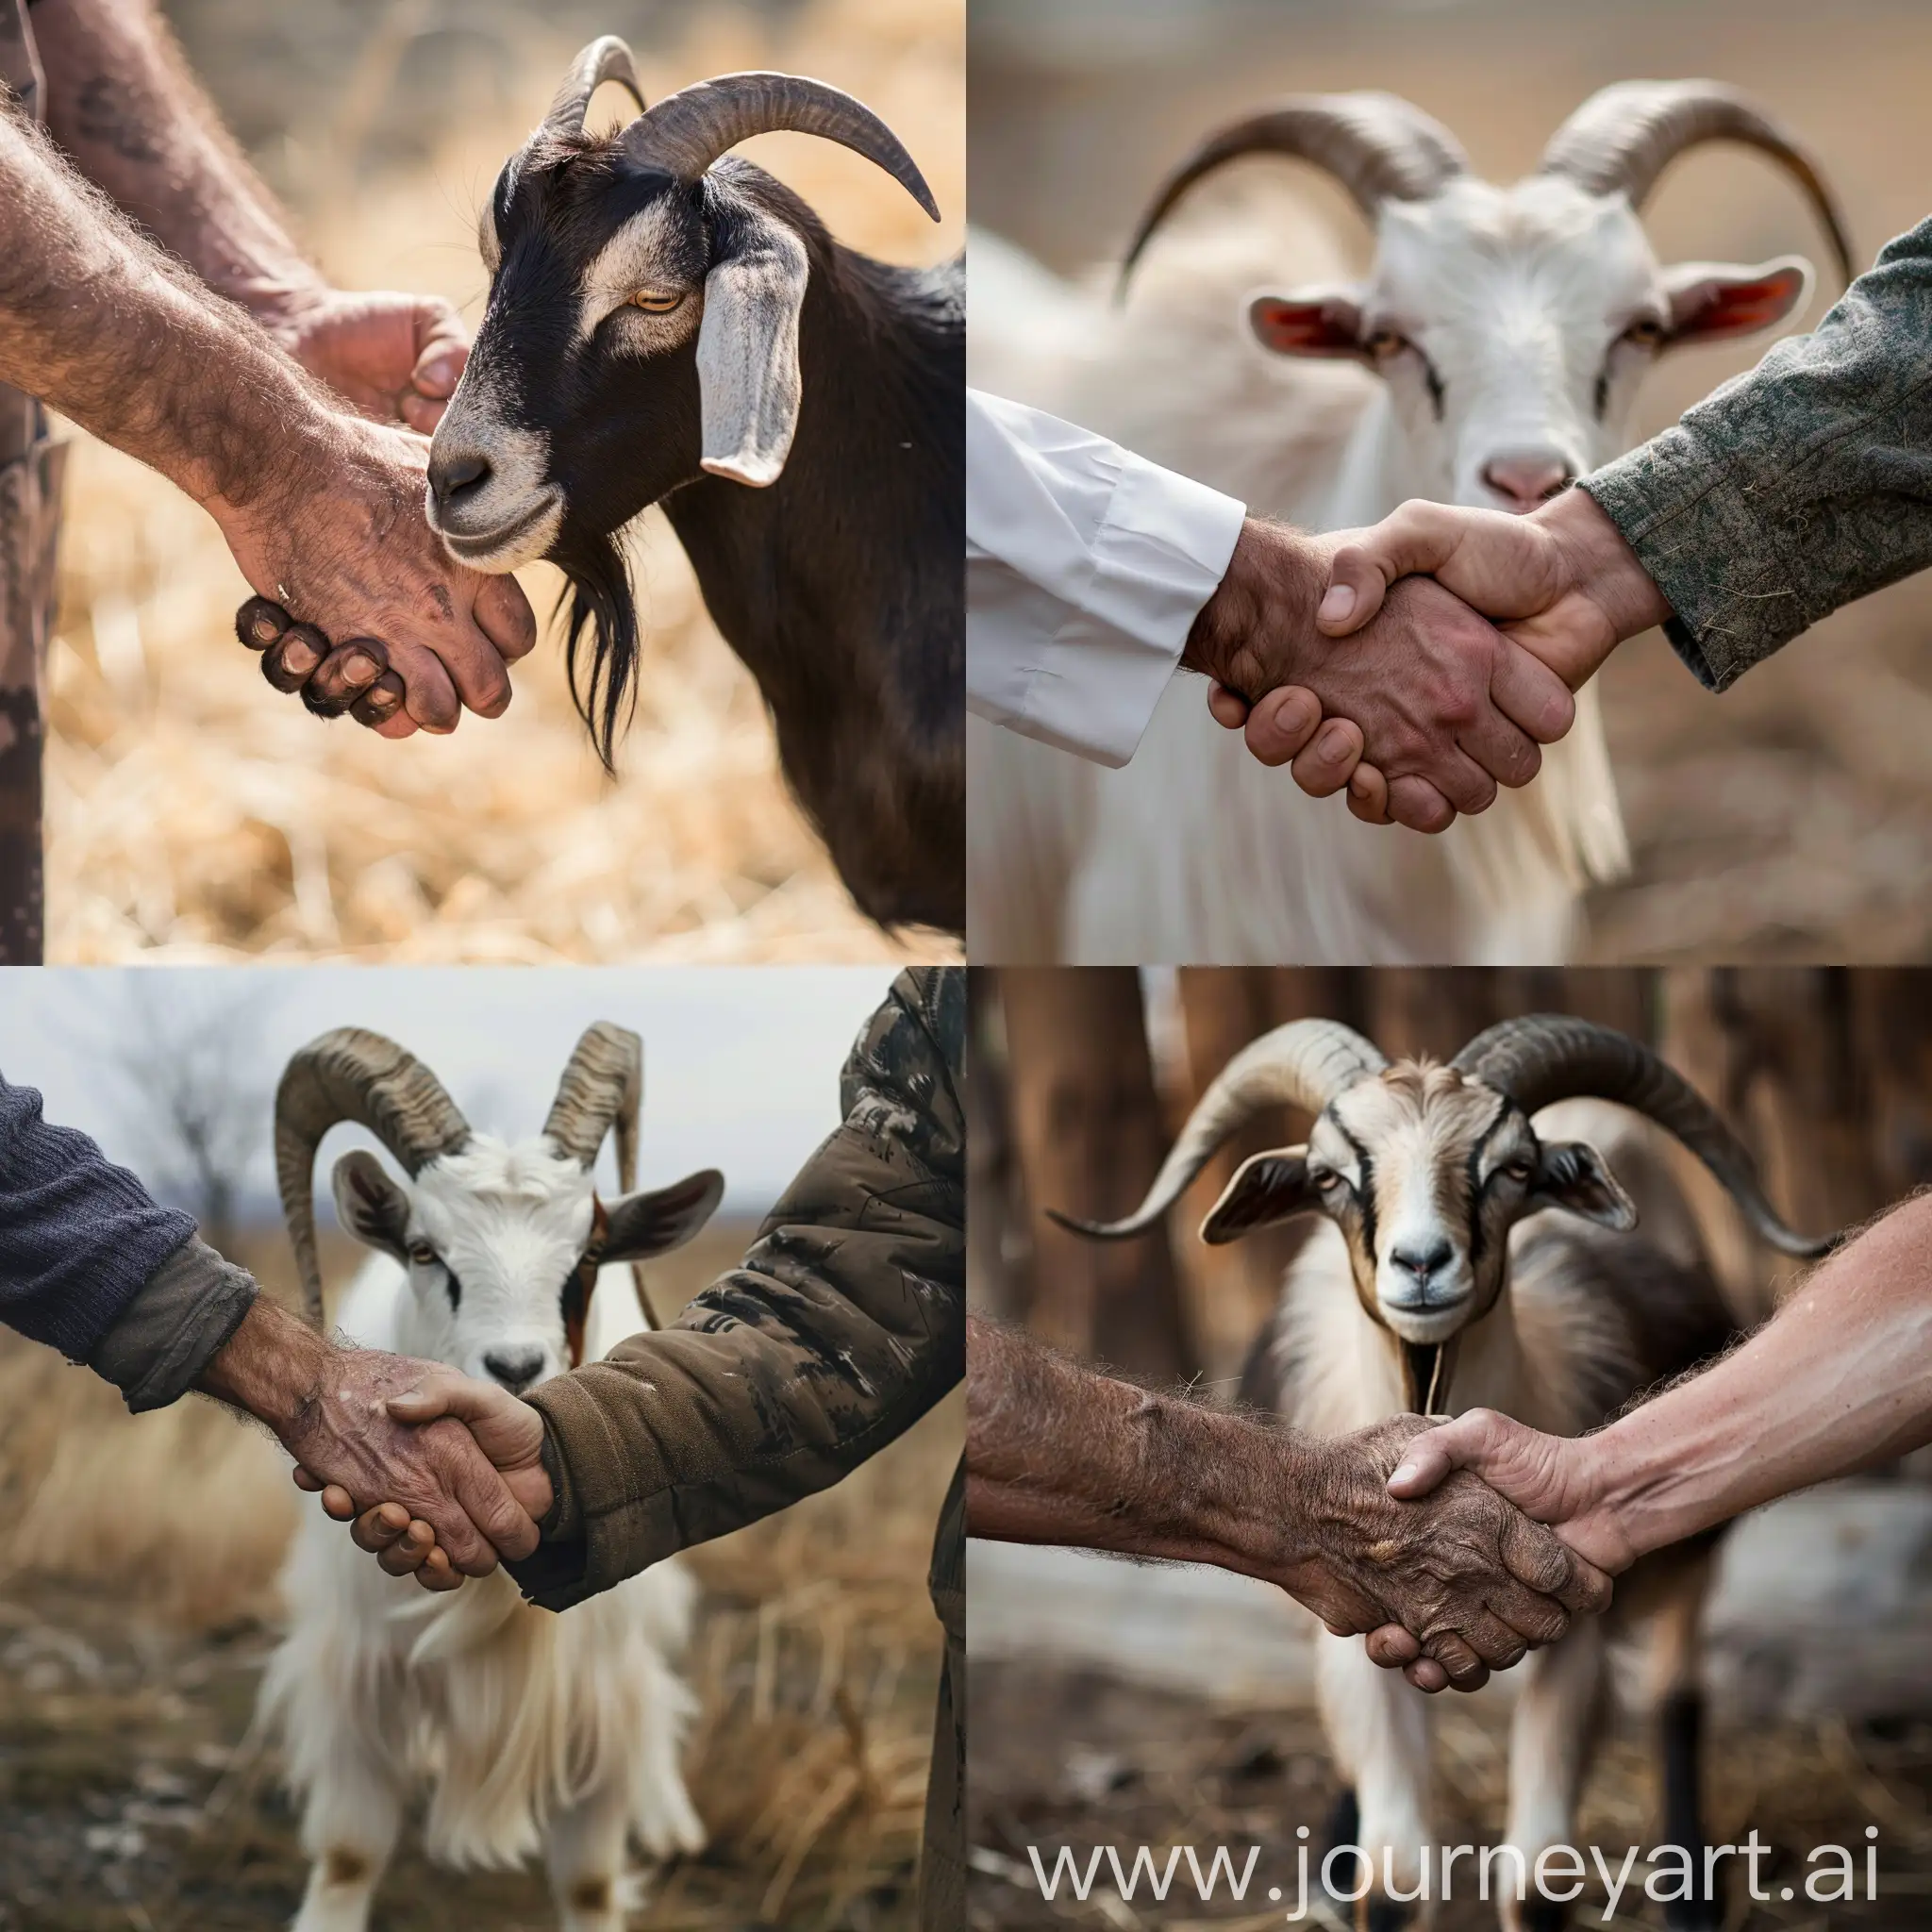 An agreement between the butcher and the goat, shaking hands, calm background,